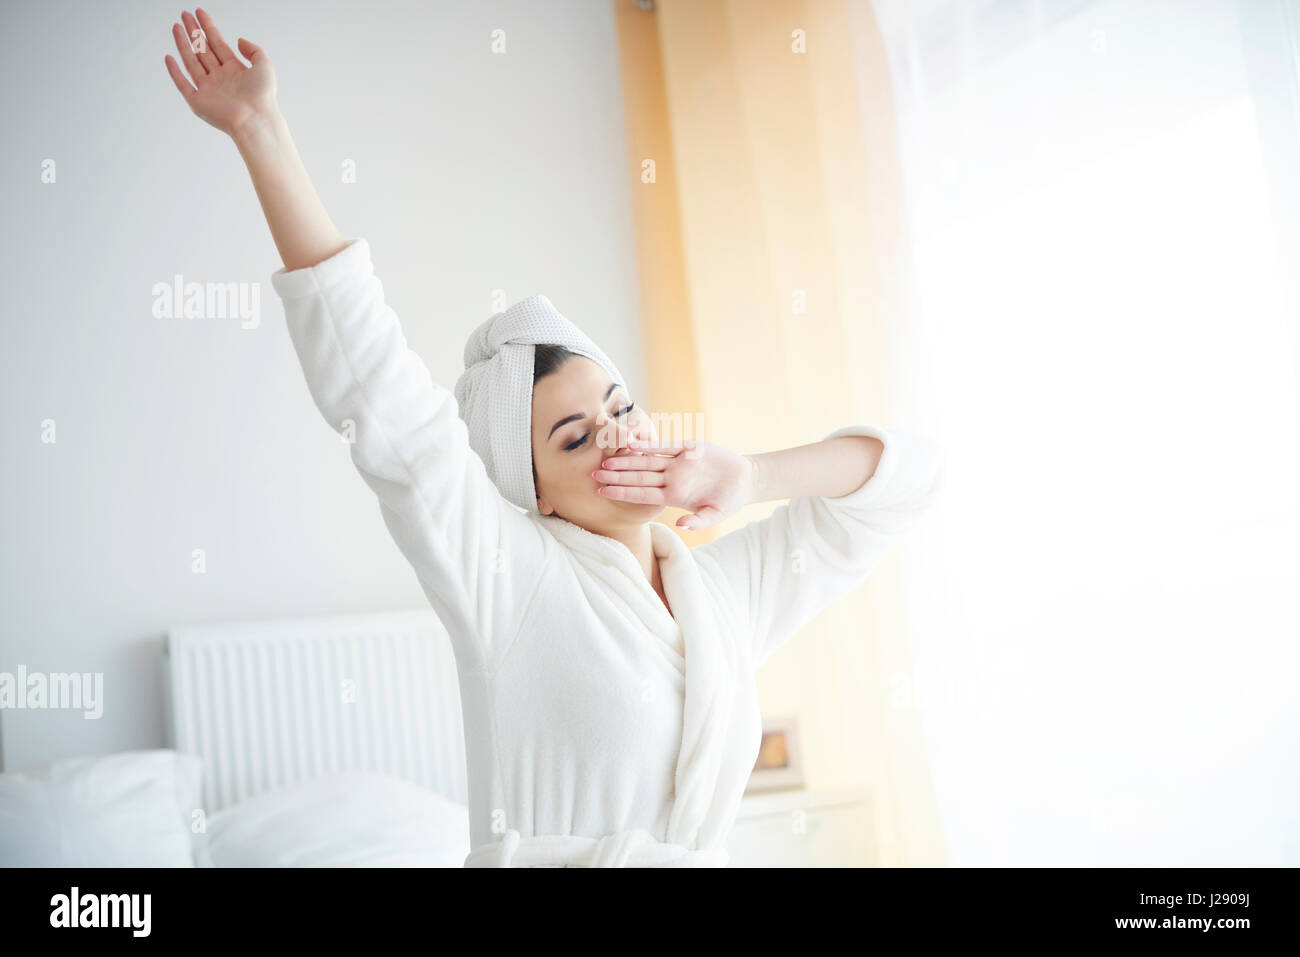 Young woman yawning and stretching Stock Photo